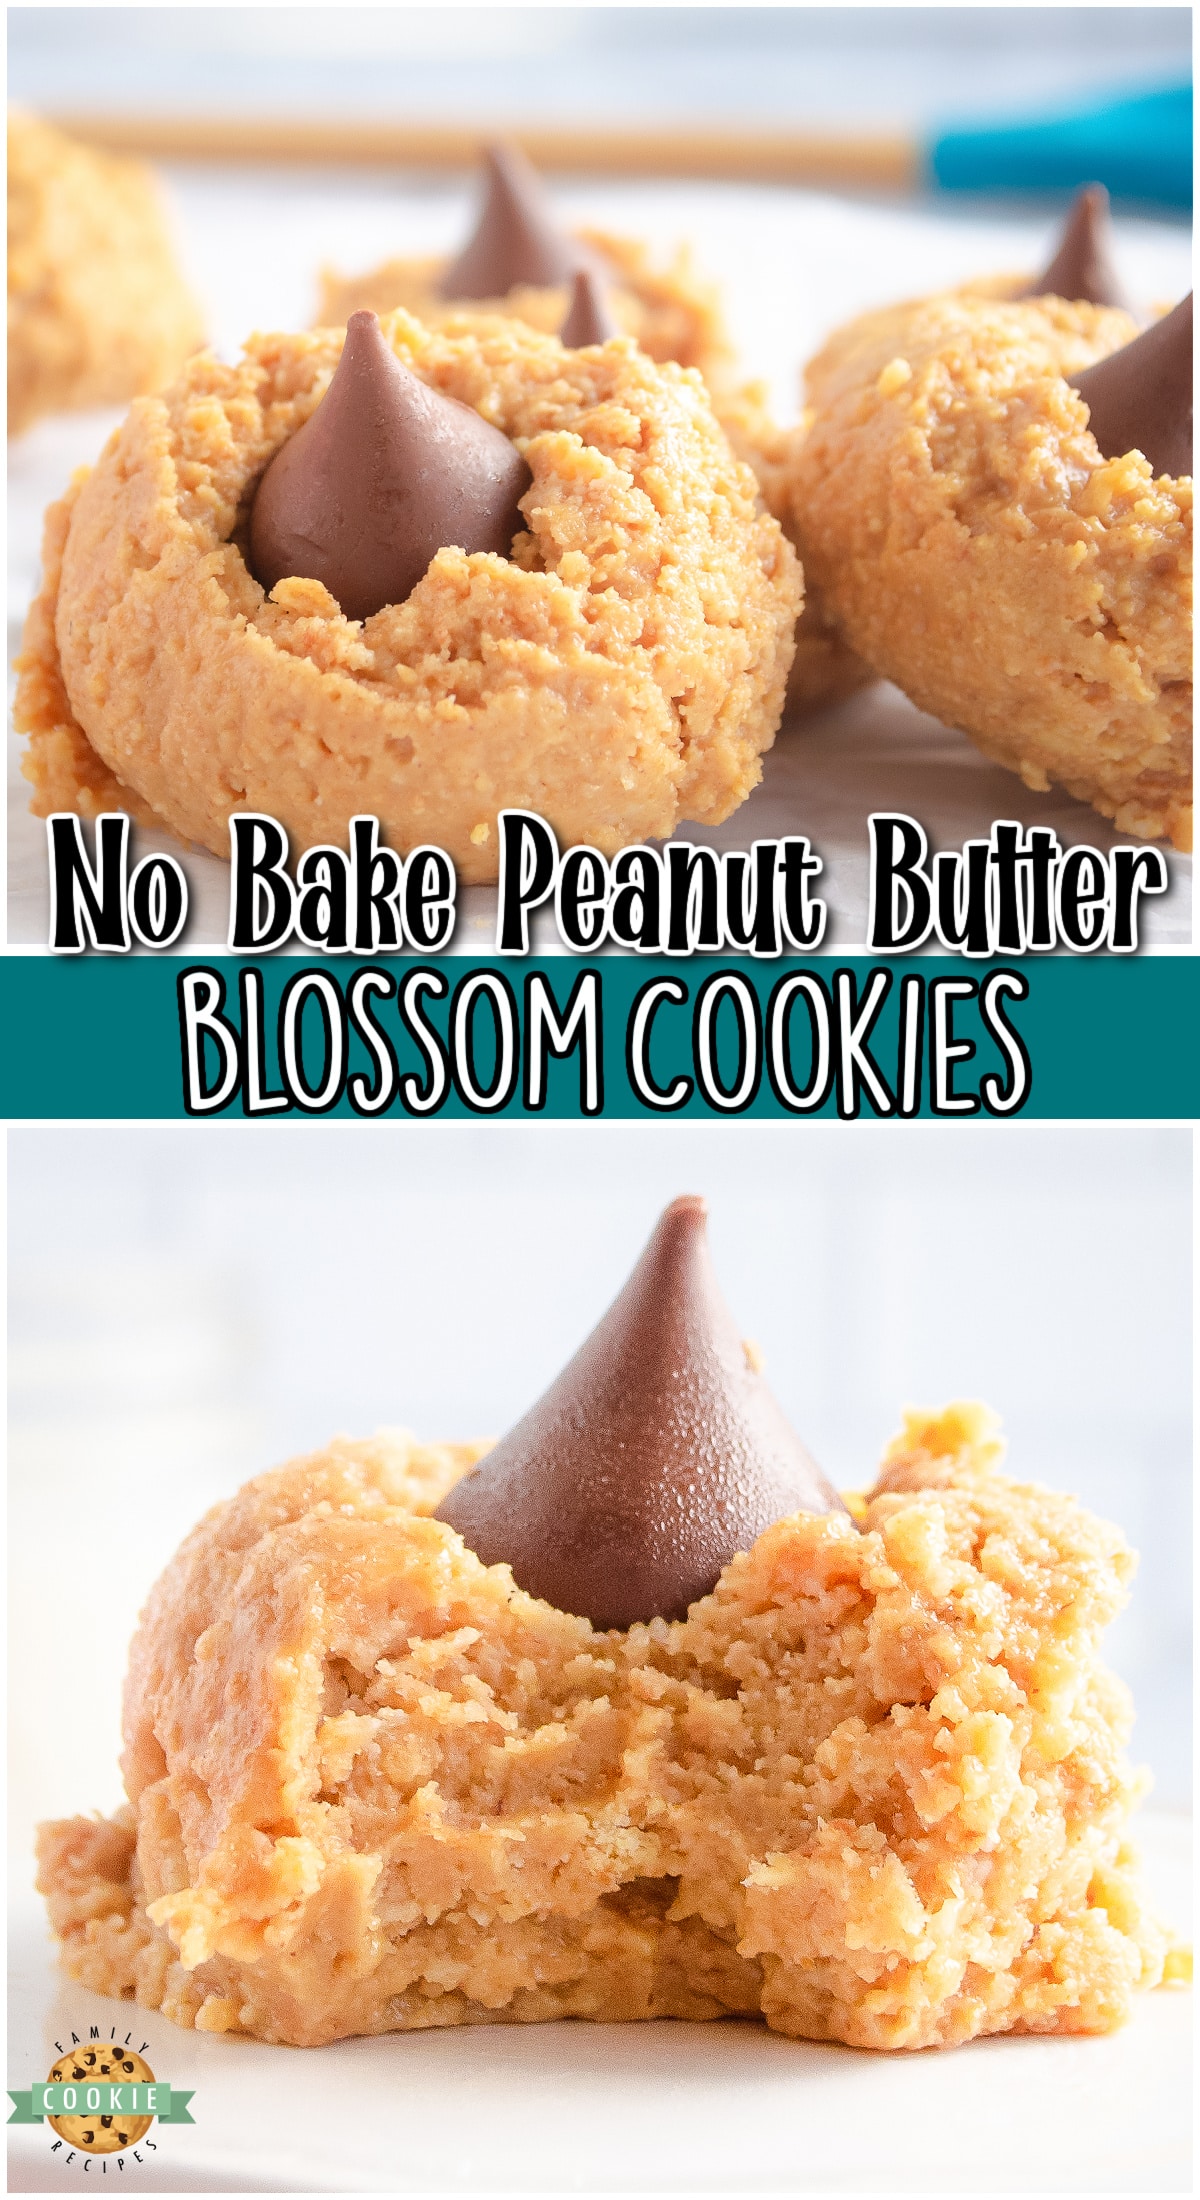 No-bake Peanut Butter Blossoms made with only 5 ingredients in 10 minutes & perfect for chocolate peanut butter lovers! Amazing peanut butter no bake cookies that mimic the traditional blossom cookie everyone loves!